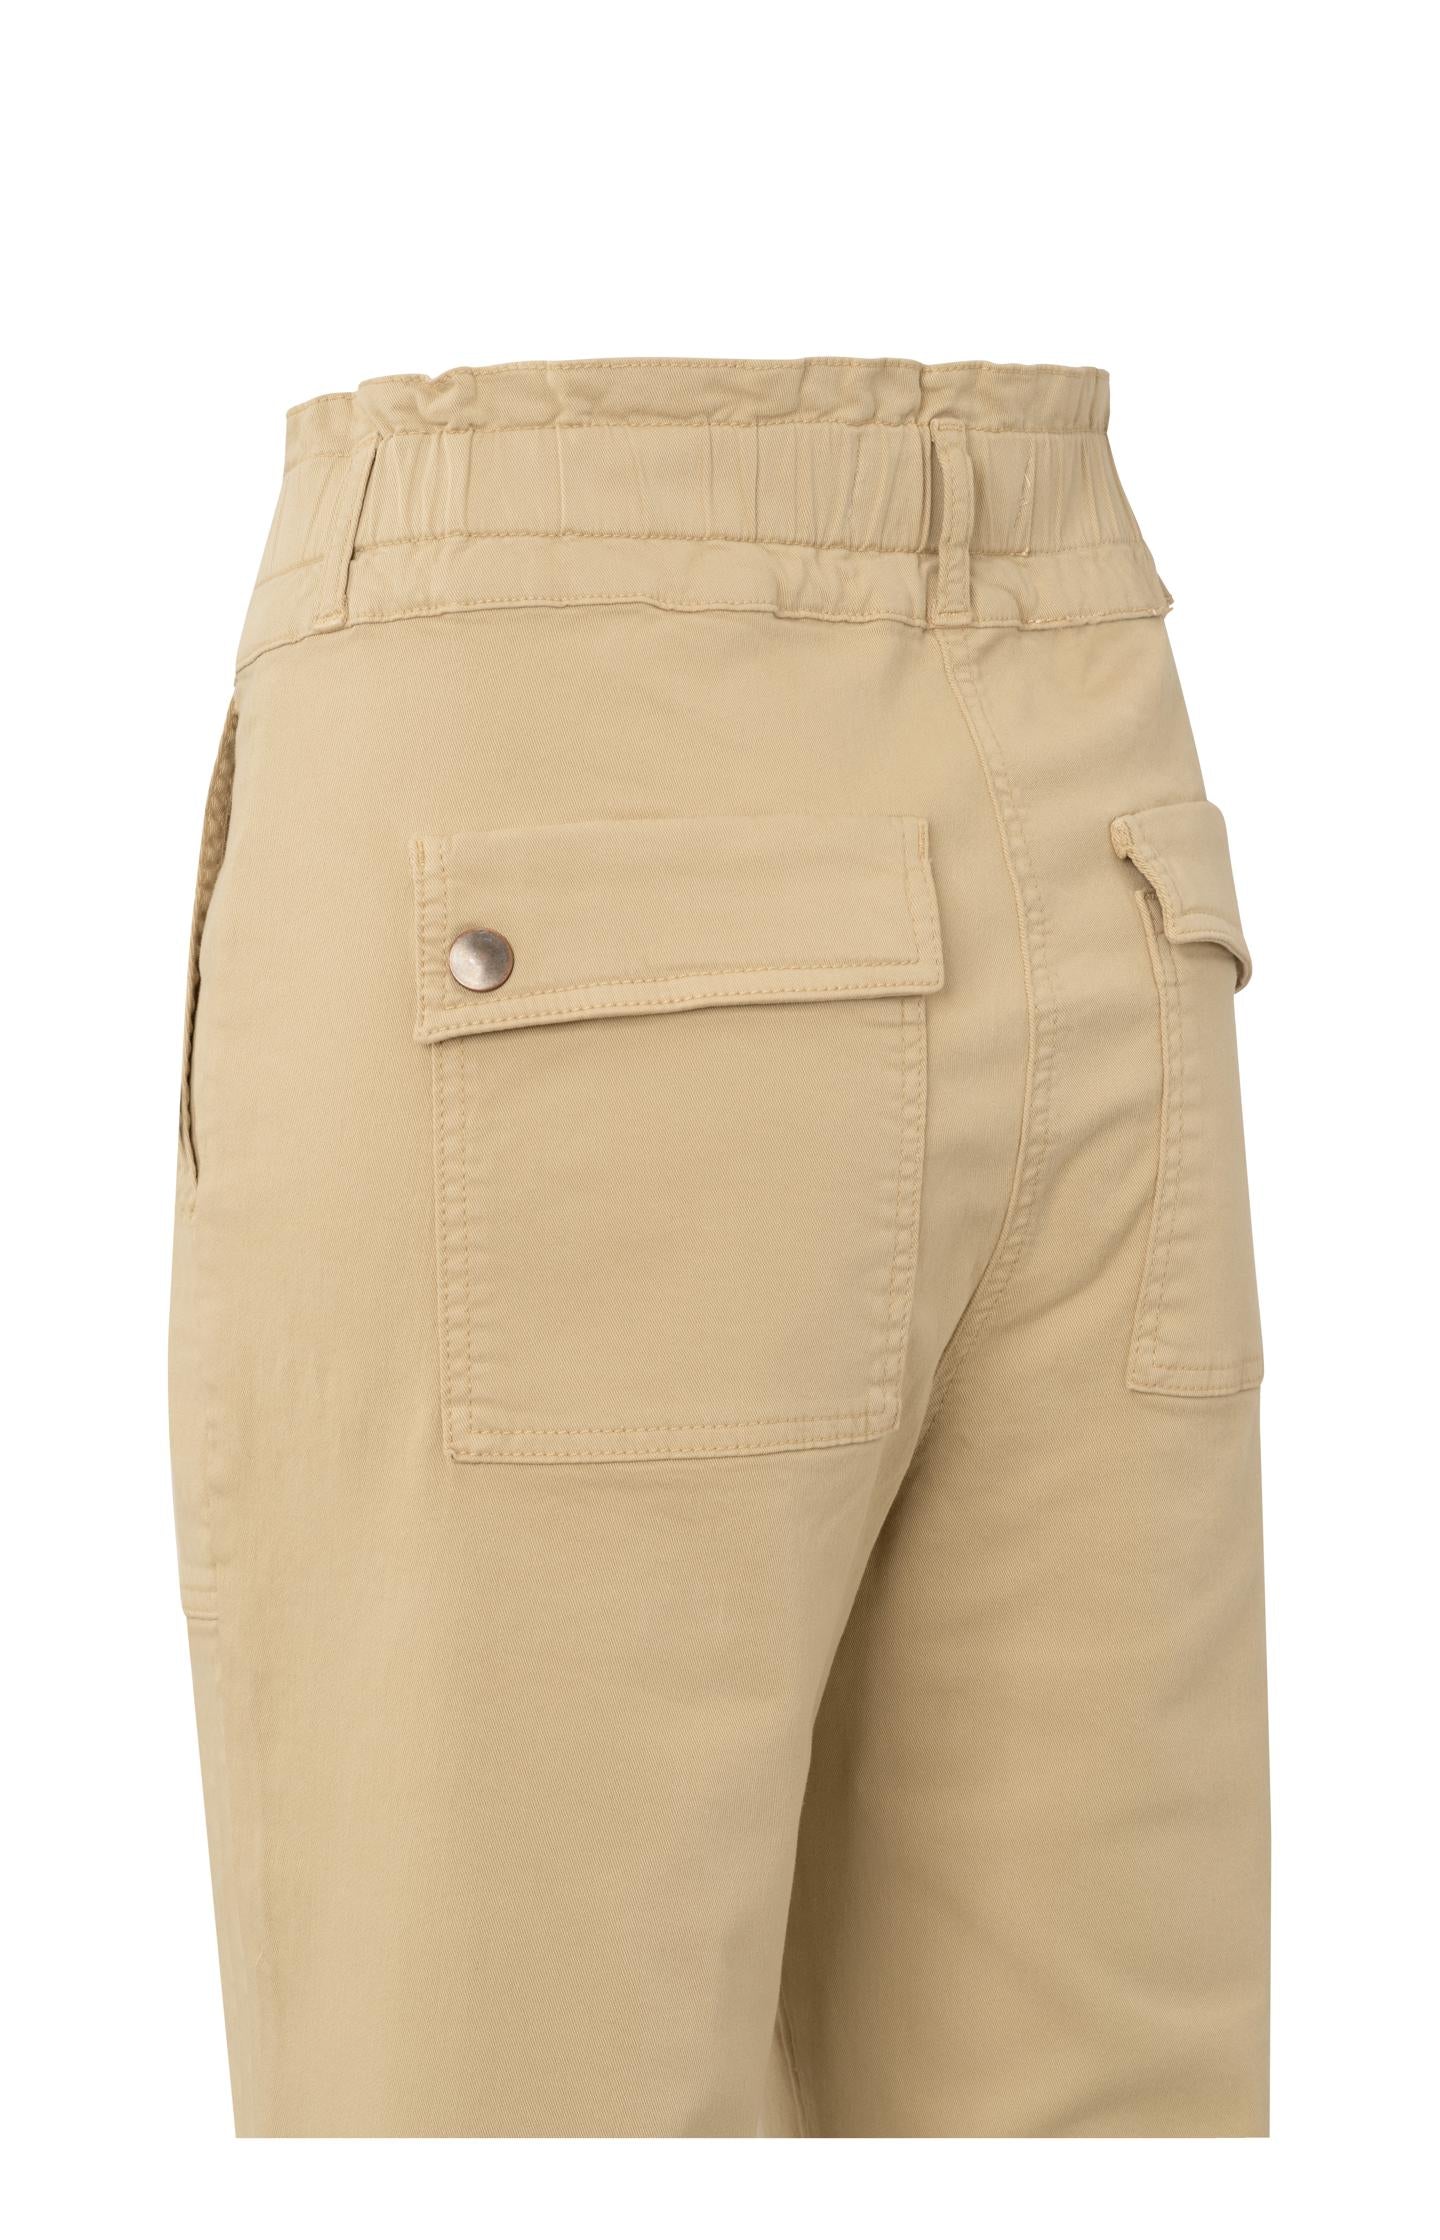 Cargo trousers with paperbag waist, pockets and buttons